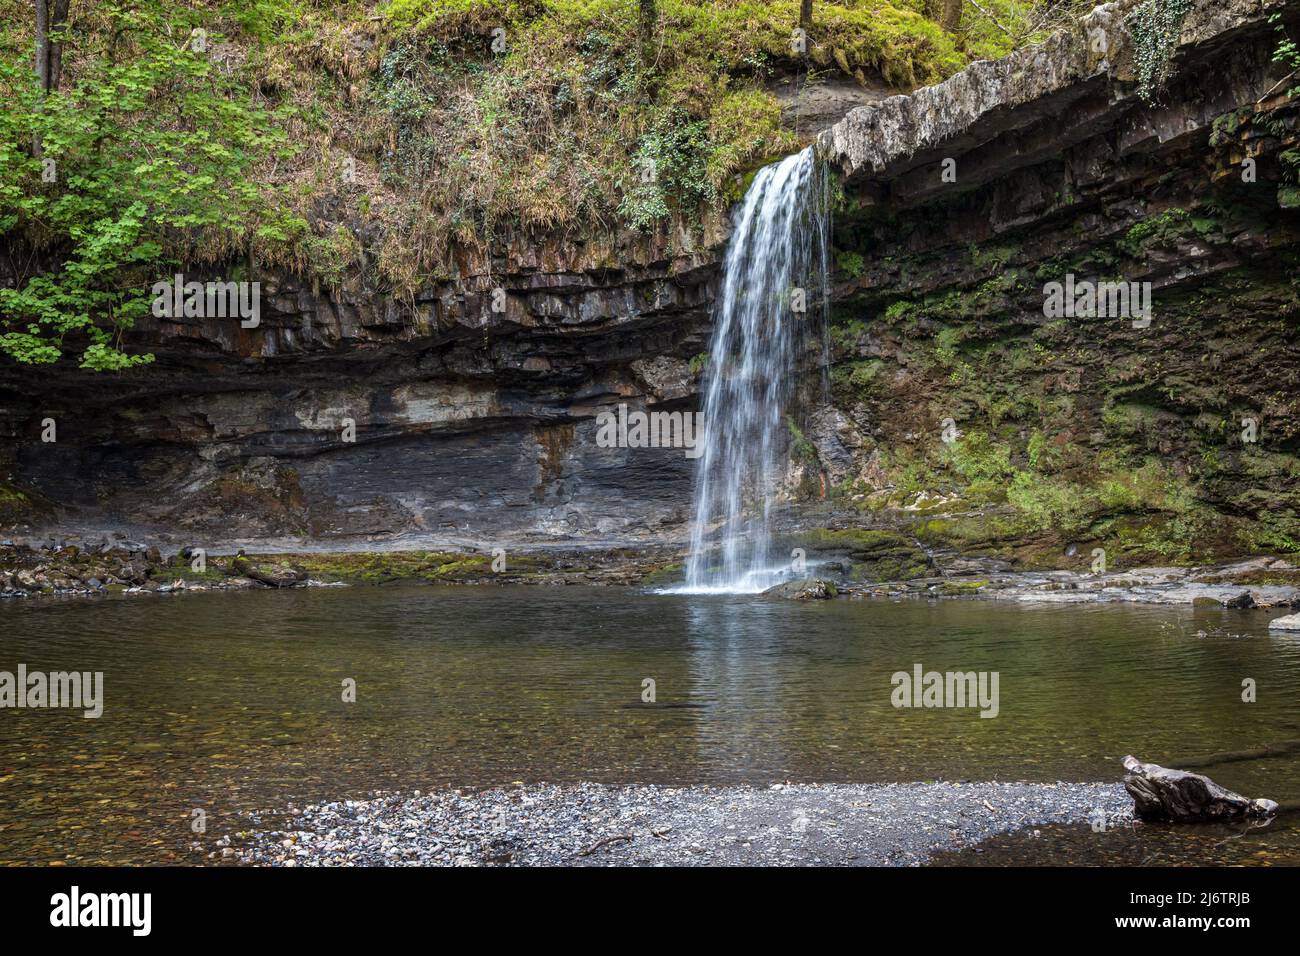 The Sgwd Gwladys (Lady Falls) waterfall on the river Afon Pyrddin near Pontneddfechan in the Brecon Beacons National Park, Wales. Stock Photo